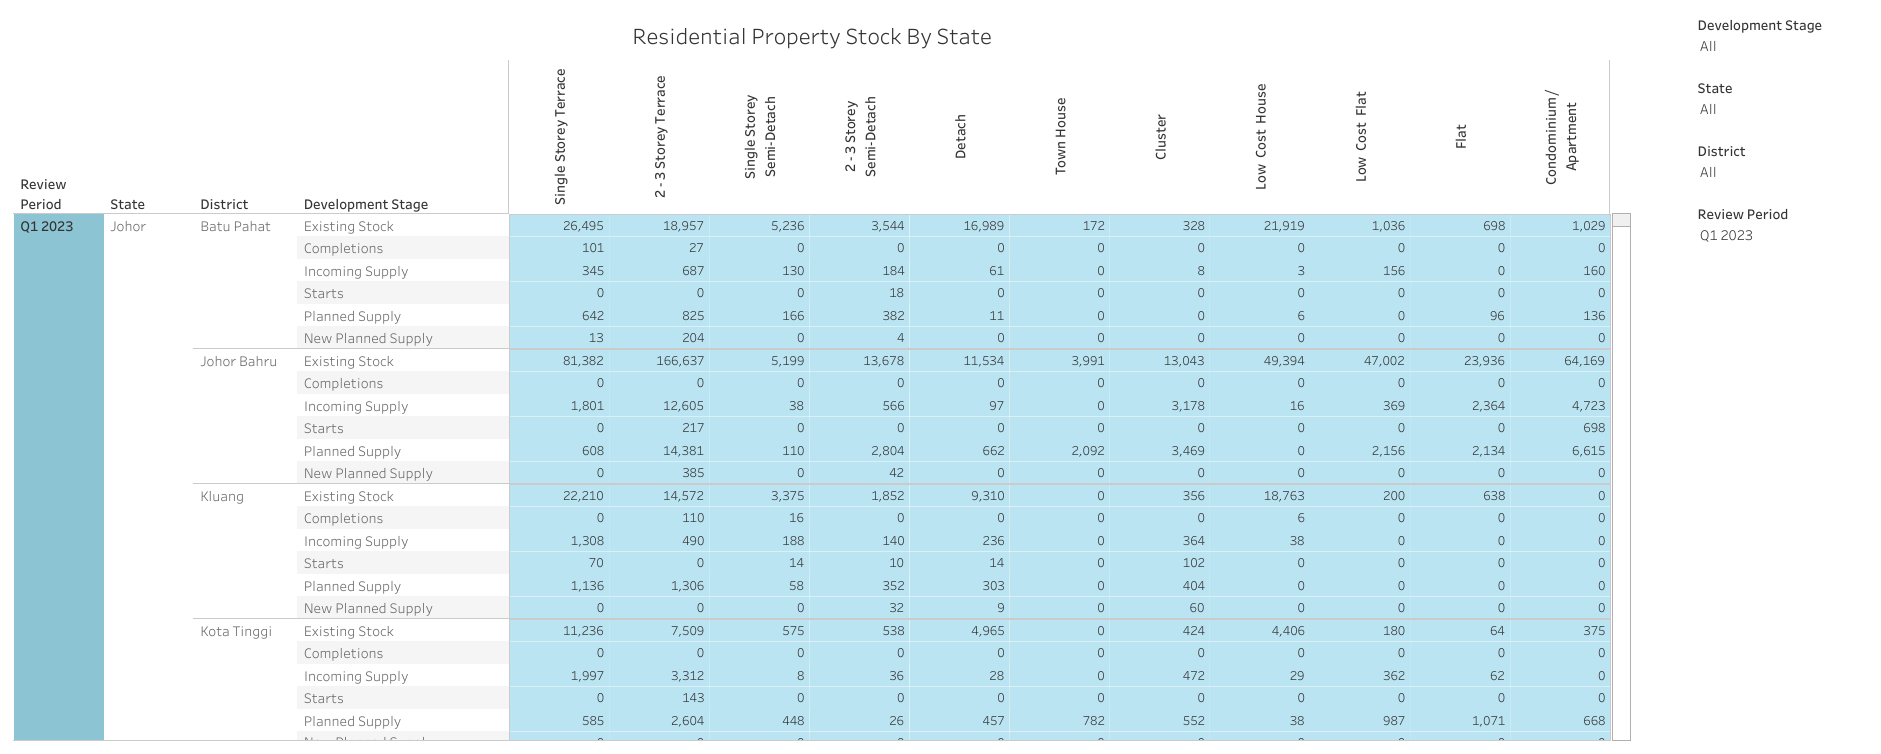 Stock in Residential Property Sector By State